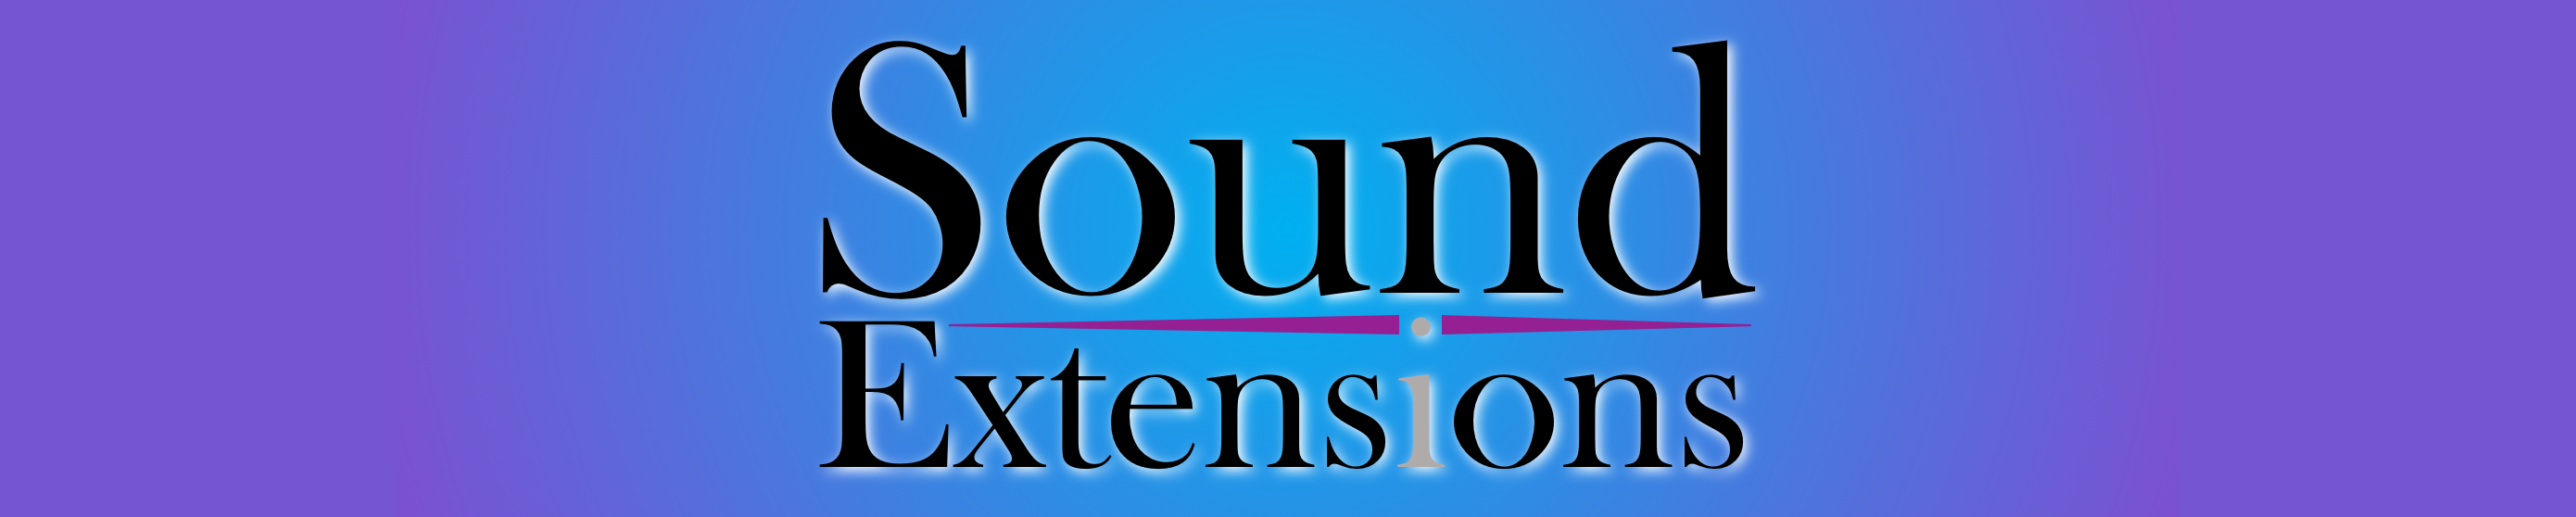 Sound Extensions Banner